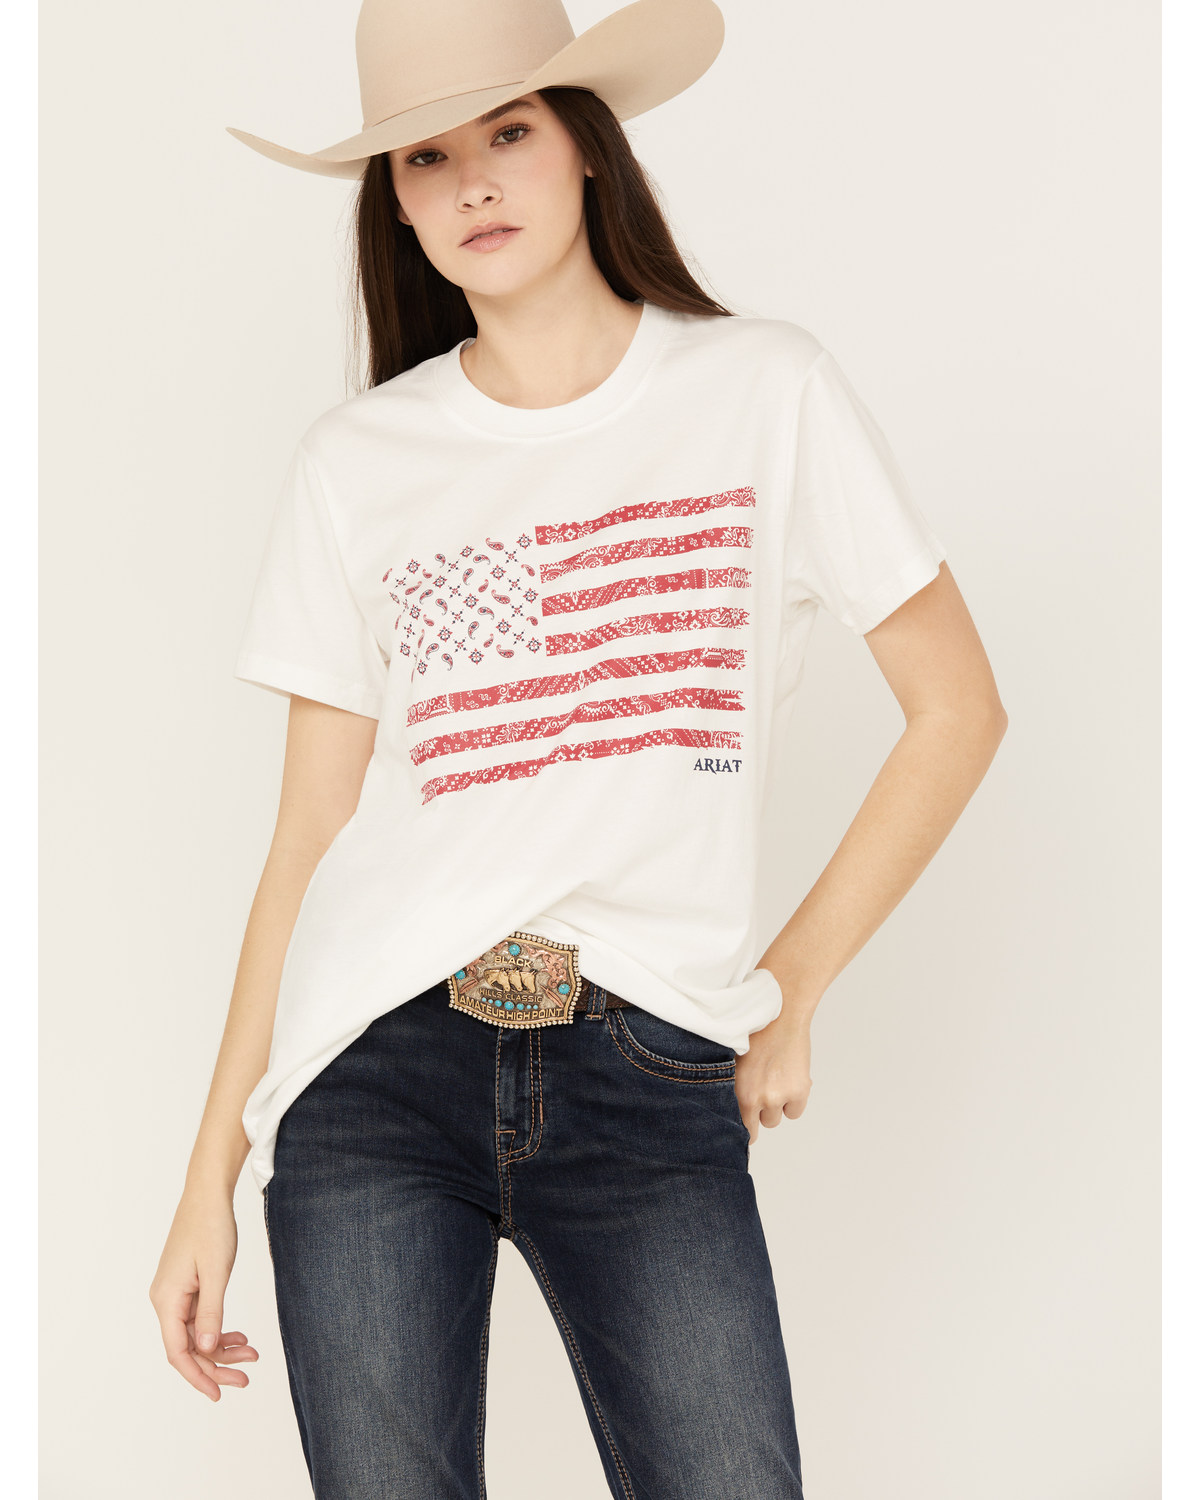 Ariat Women's Small Town Graphic Short Sleeve Tee